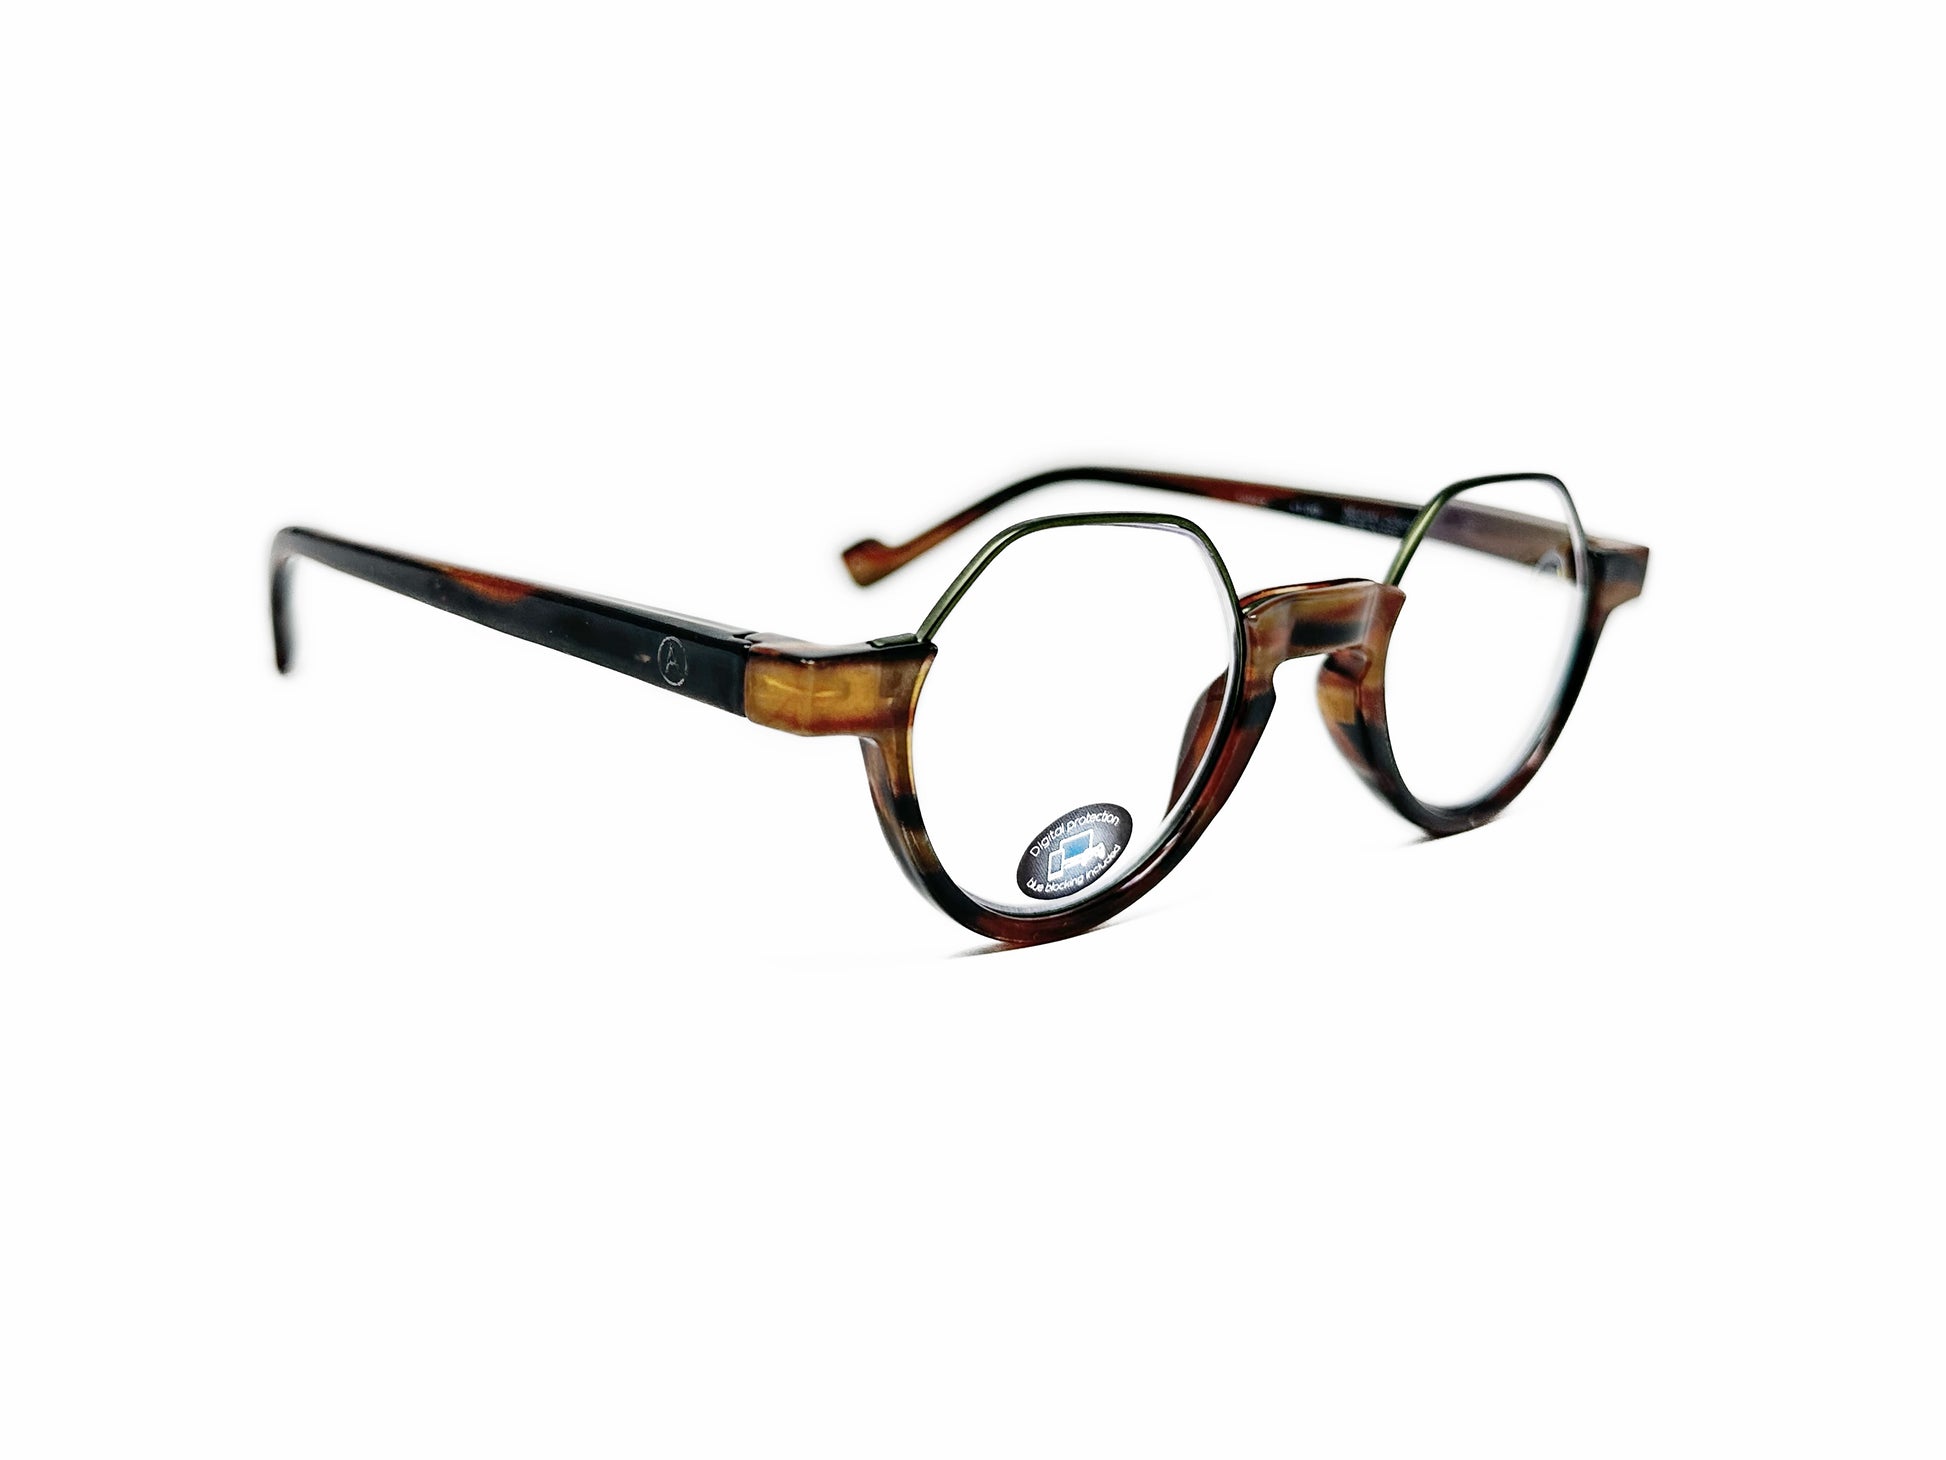 Aptica round acetate reader with flattop. Model: Rituals. Color: Brown buffalo horn with silver trim on top. Side view.